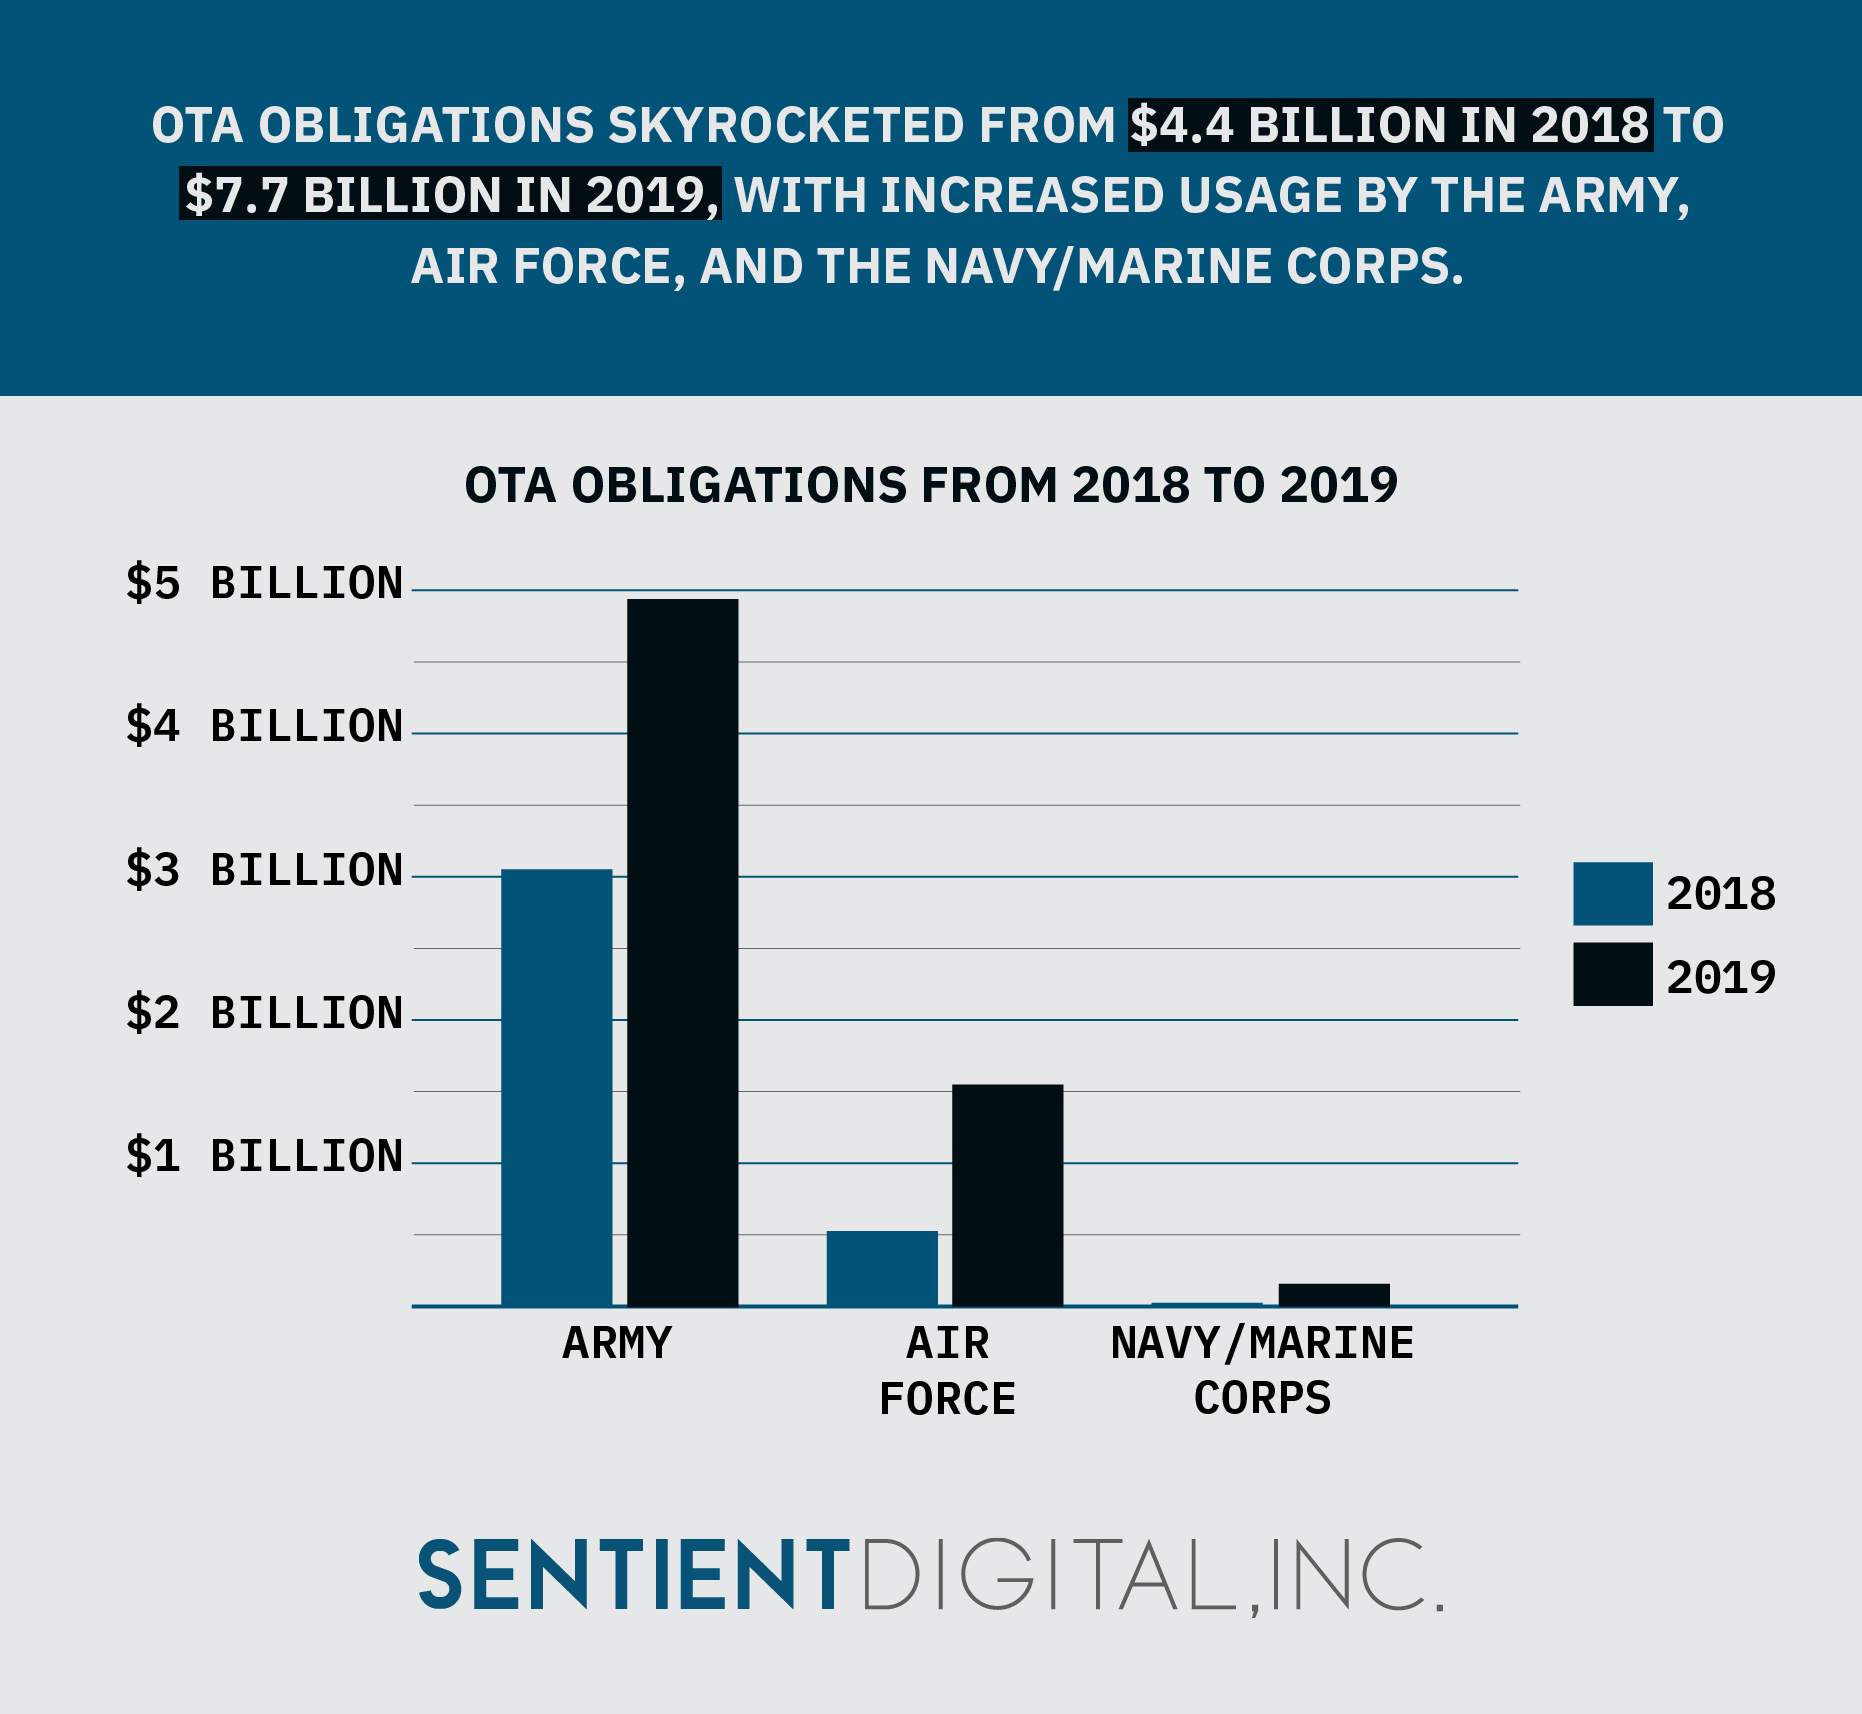 Check out this infographic or keep reading our post for data on OTAs in government contracting.